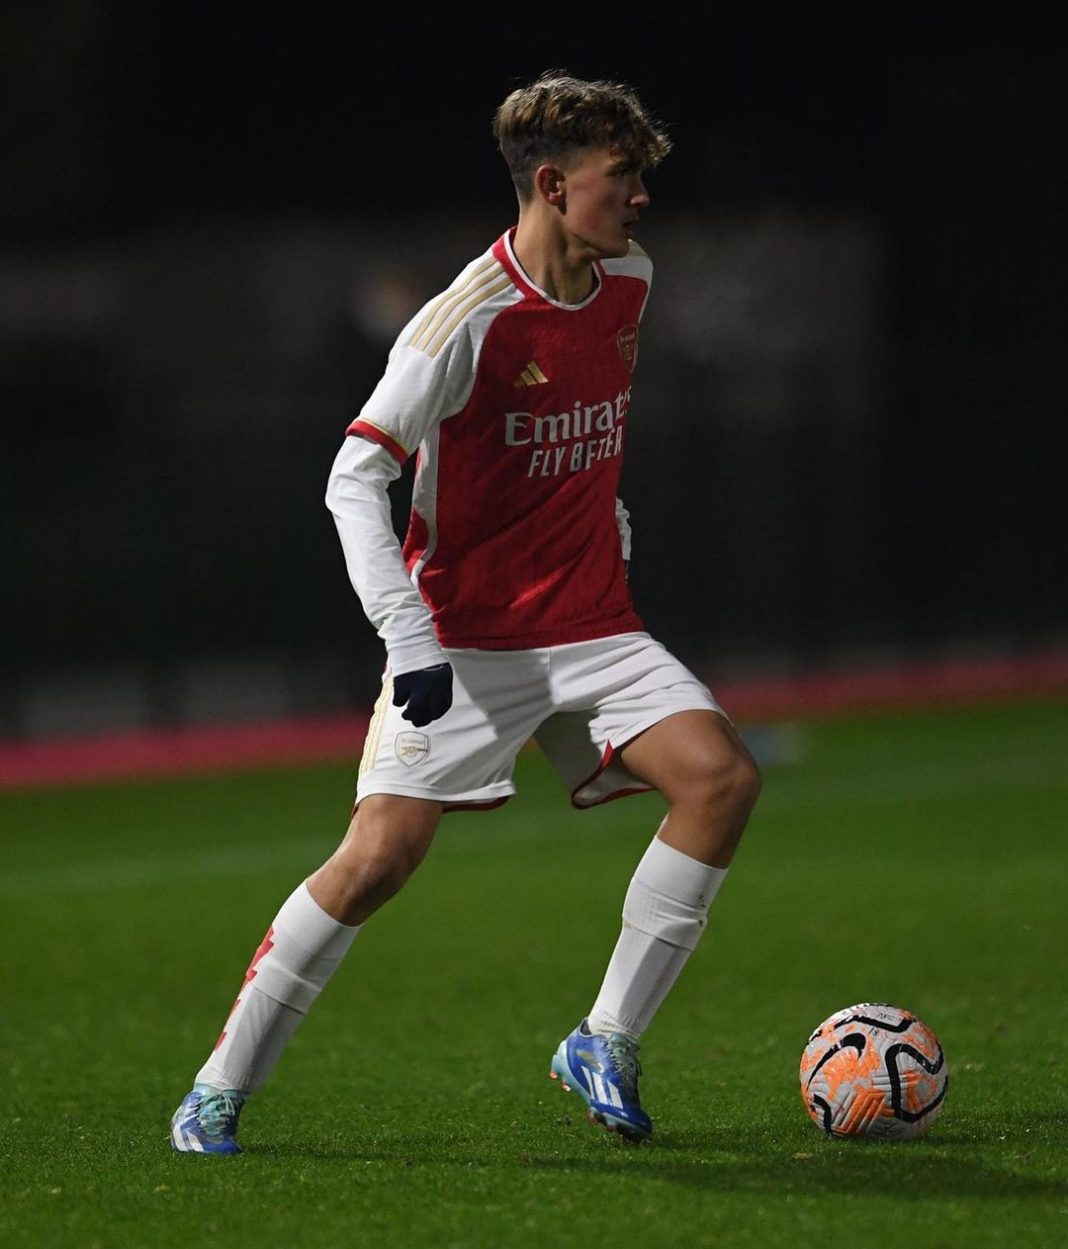 Max Dowman plays for the Arsenal academy (Photo via Dowman on Instagram)